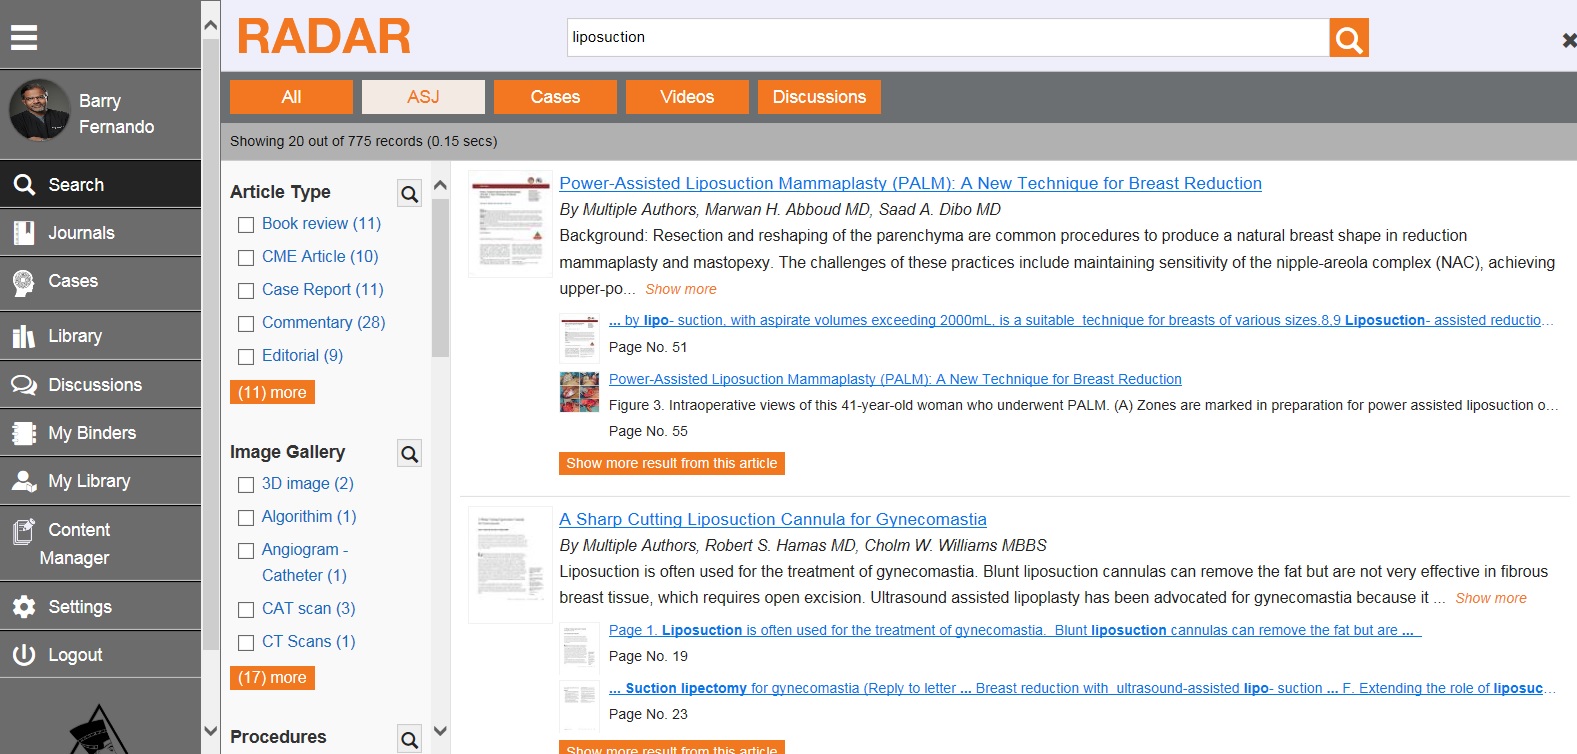 Browse and Review Industry Journals for Relevant Information